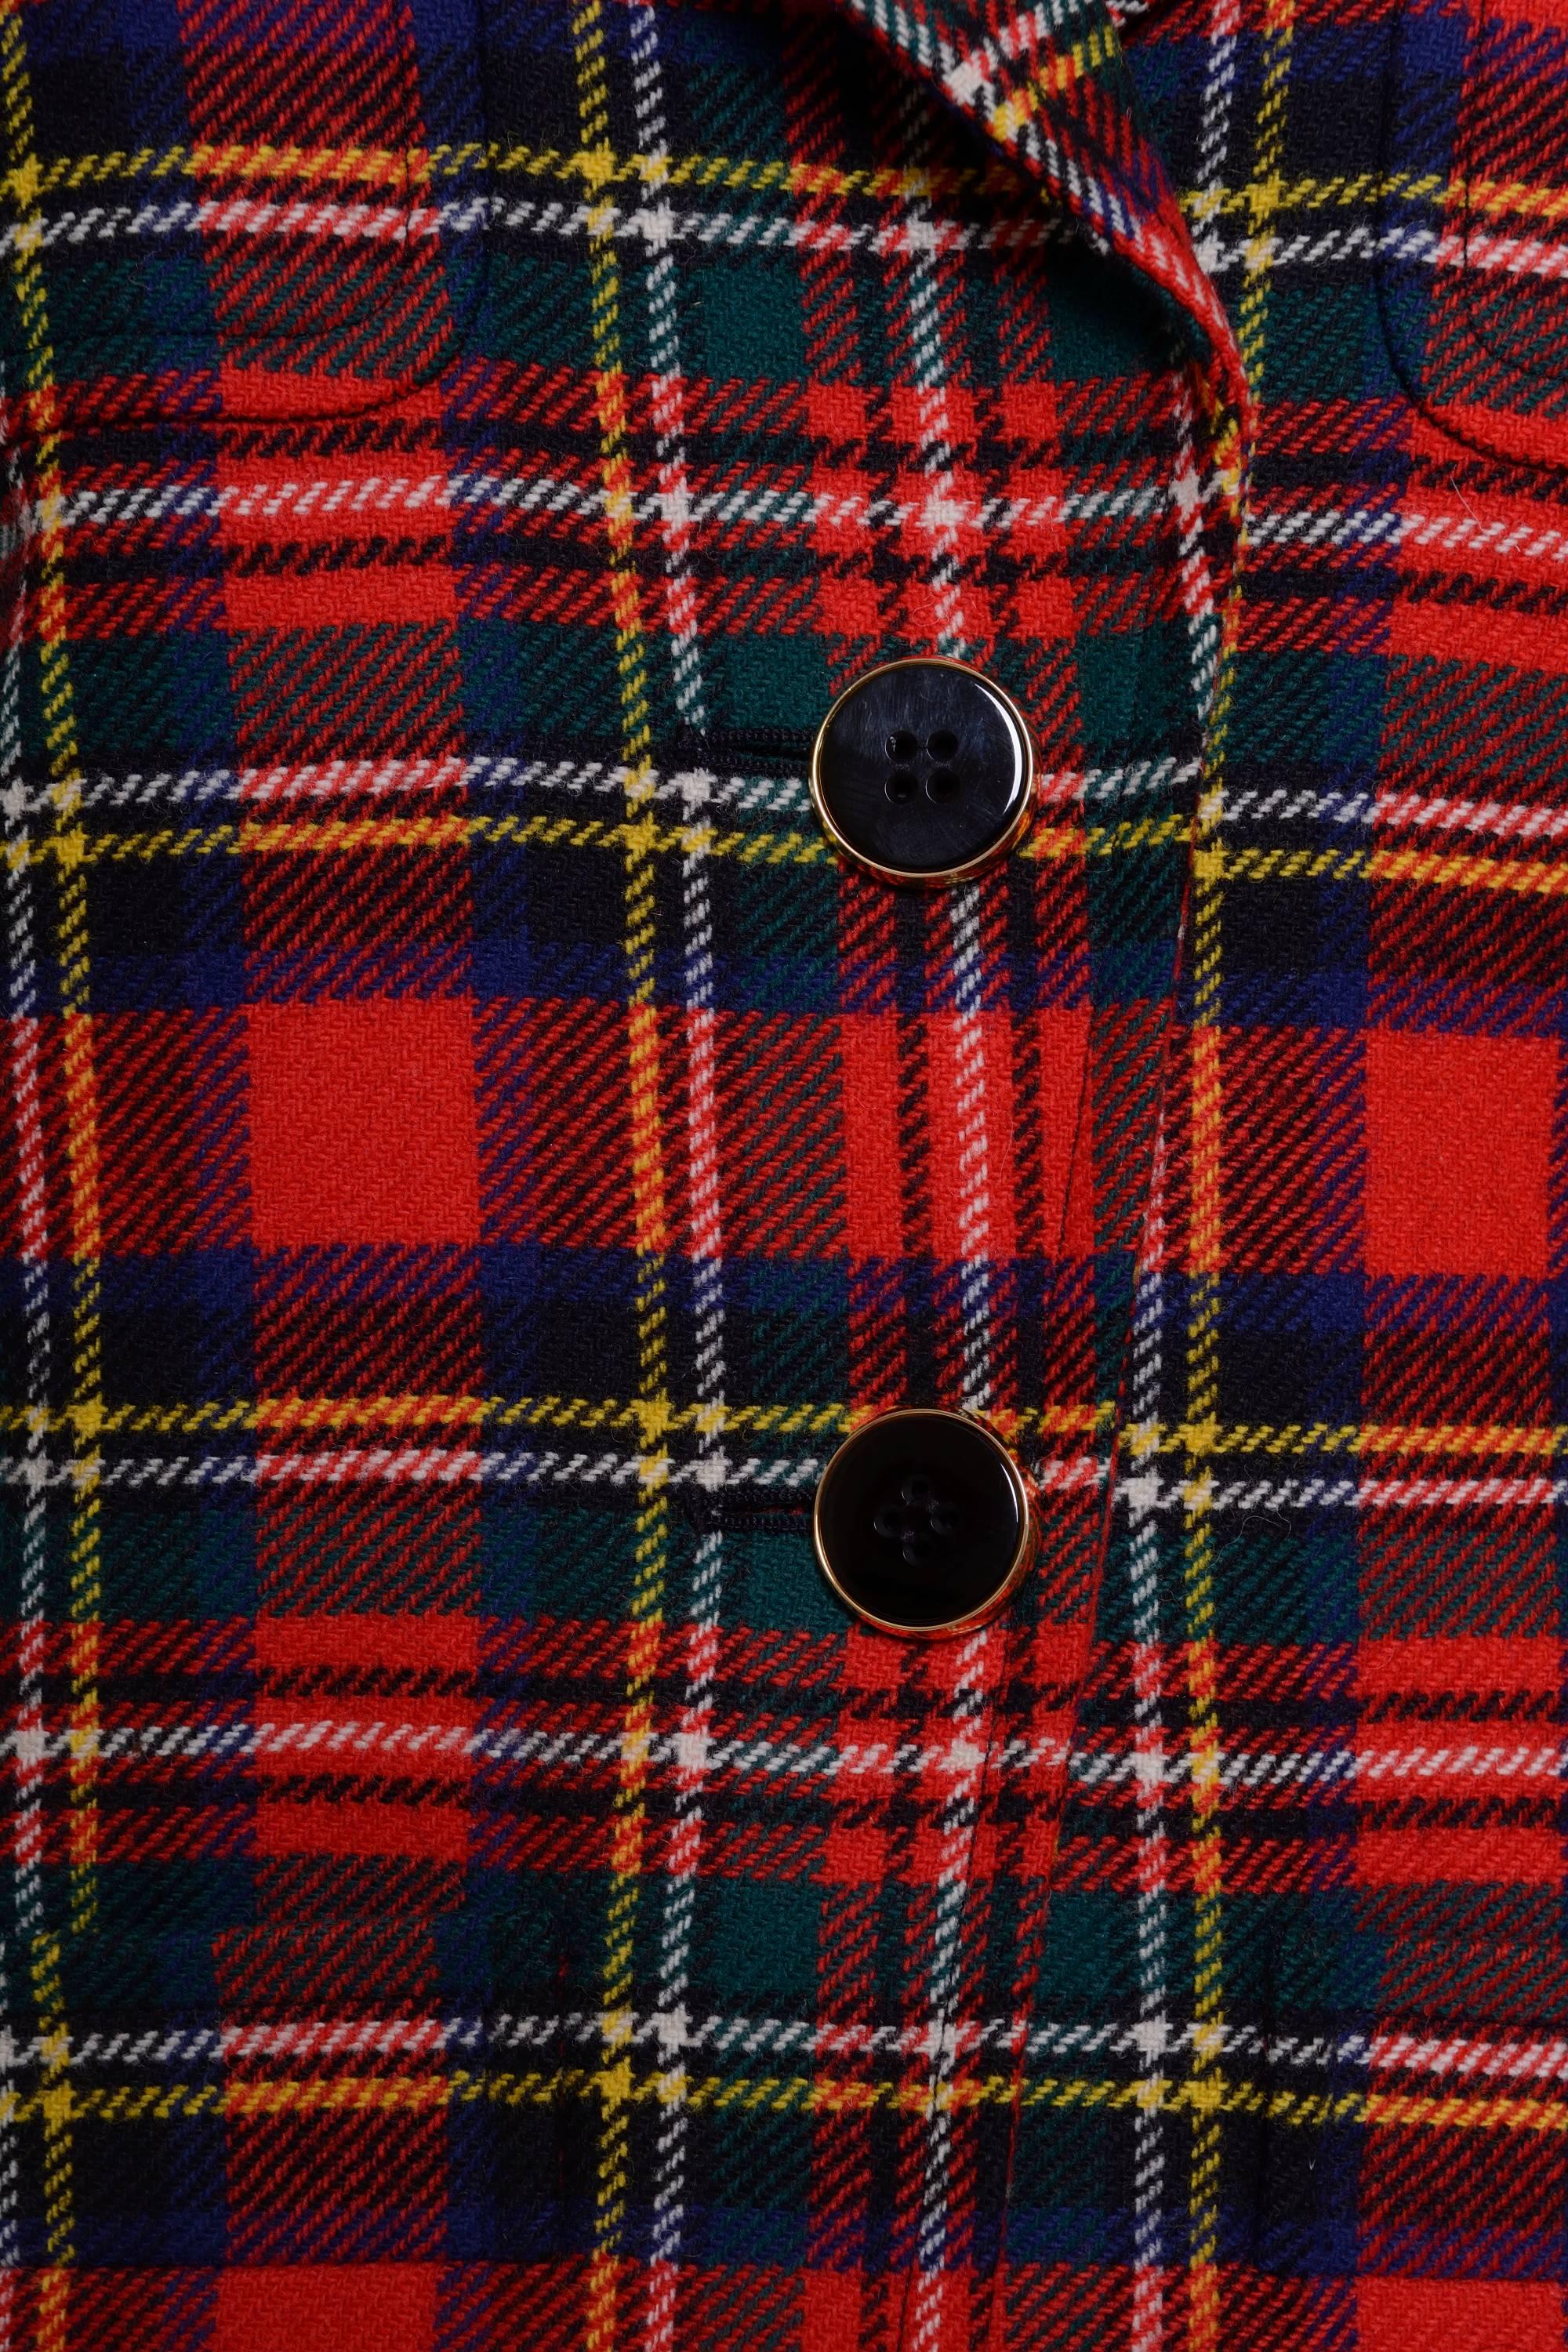 1980s YVES SAINT LAURENT Rive Gauche Tartan Suit Skirt In Excellent Condition For Sale In Milan, Italy